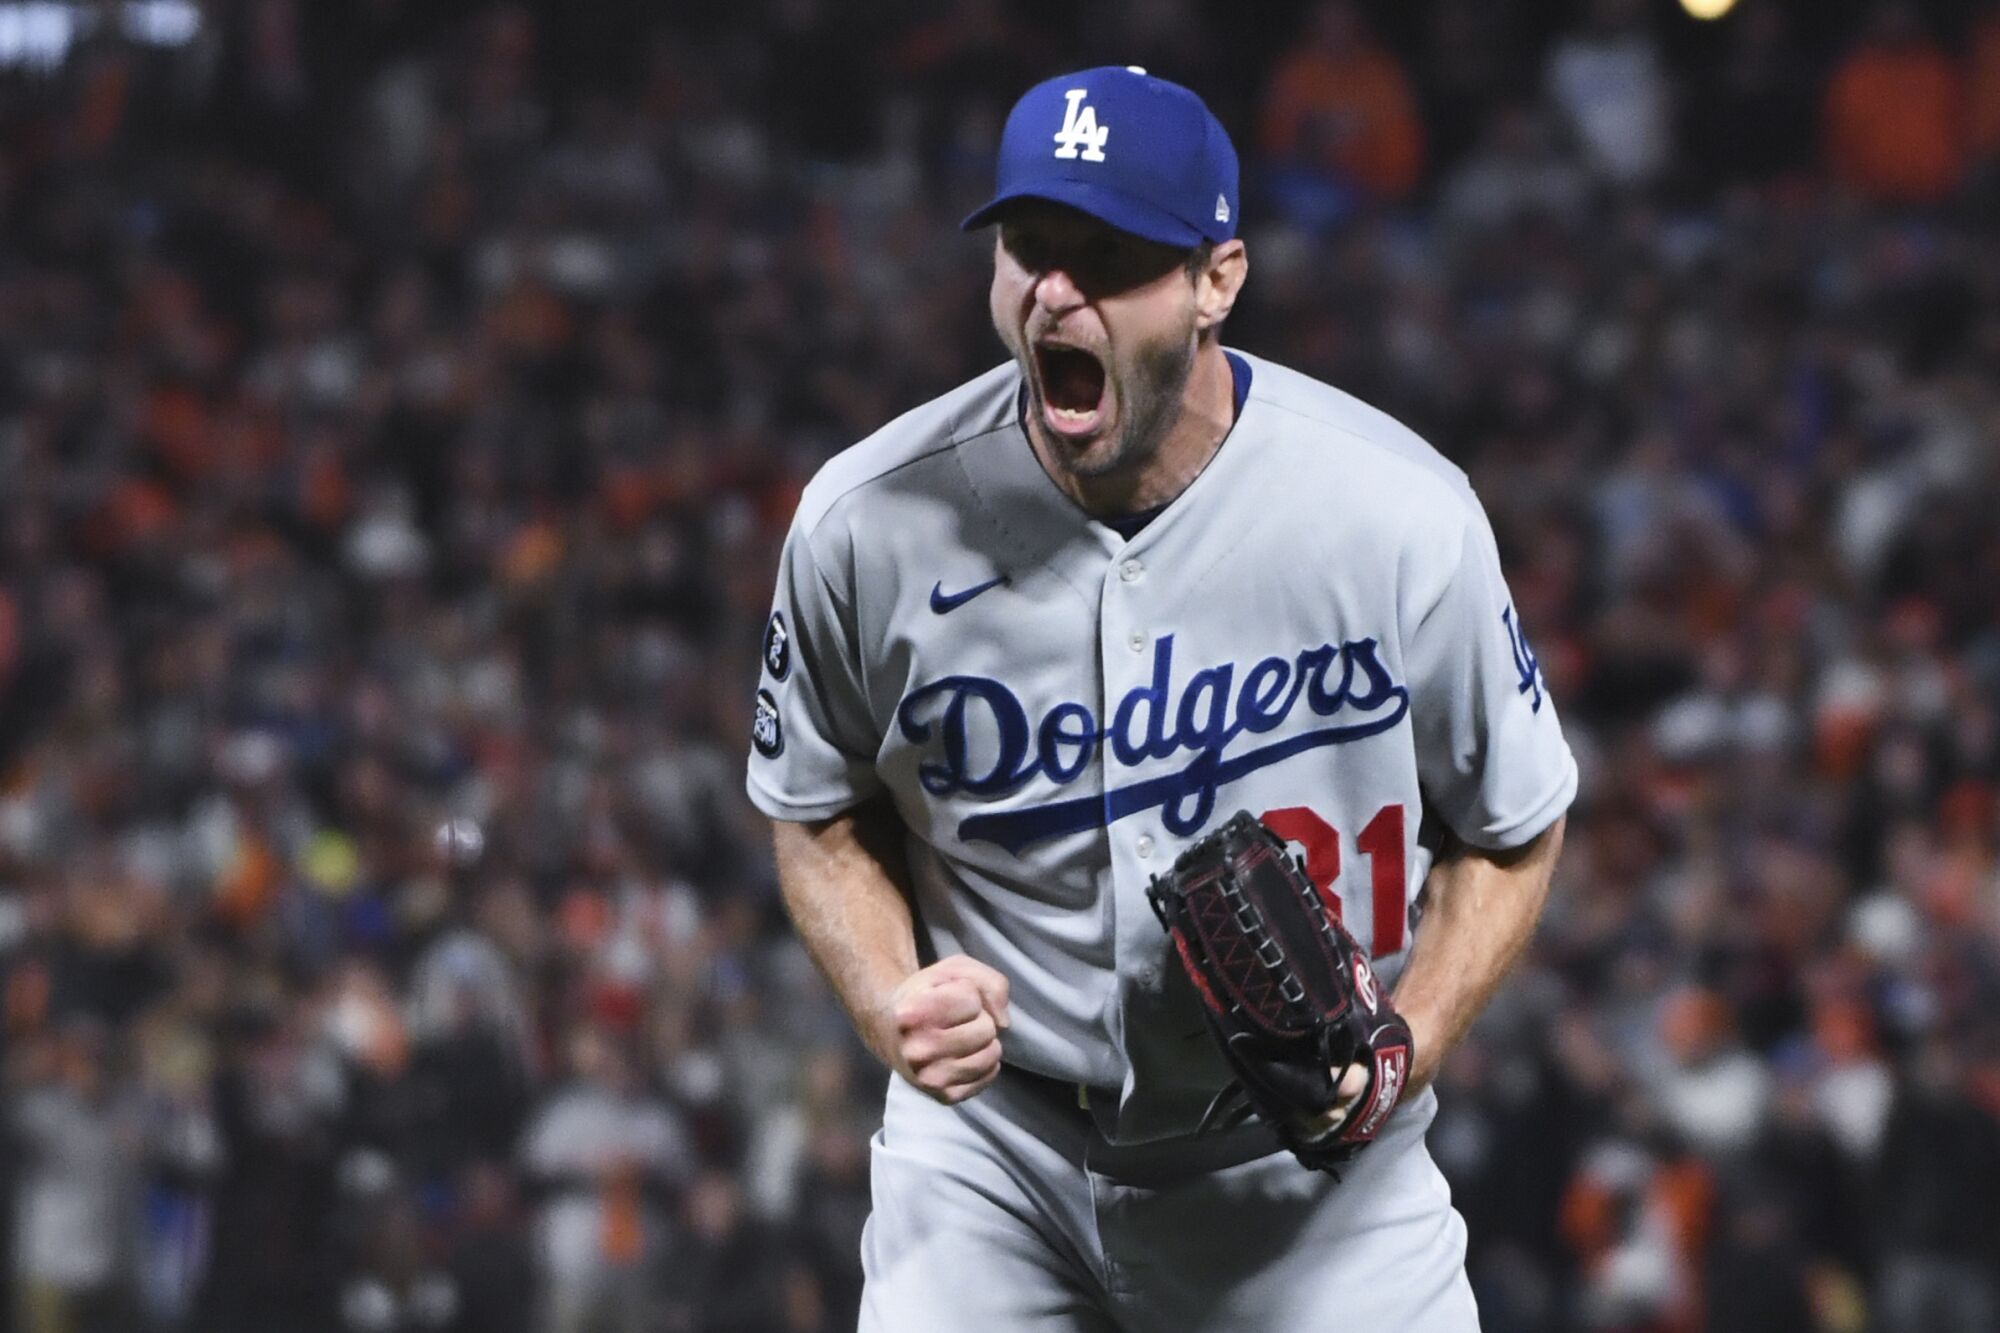 Dodgers pitcher Max Scherzer reacts after striking out Giants' Wilmer Flores to end game five.